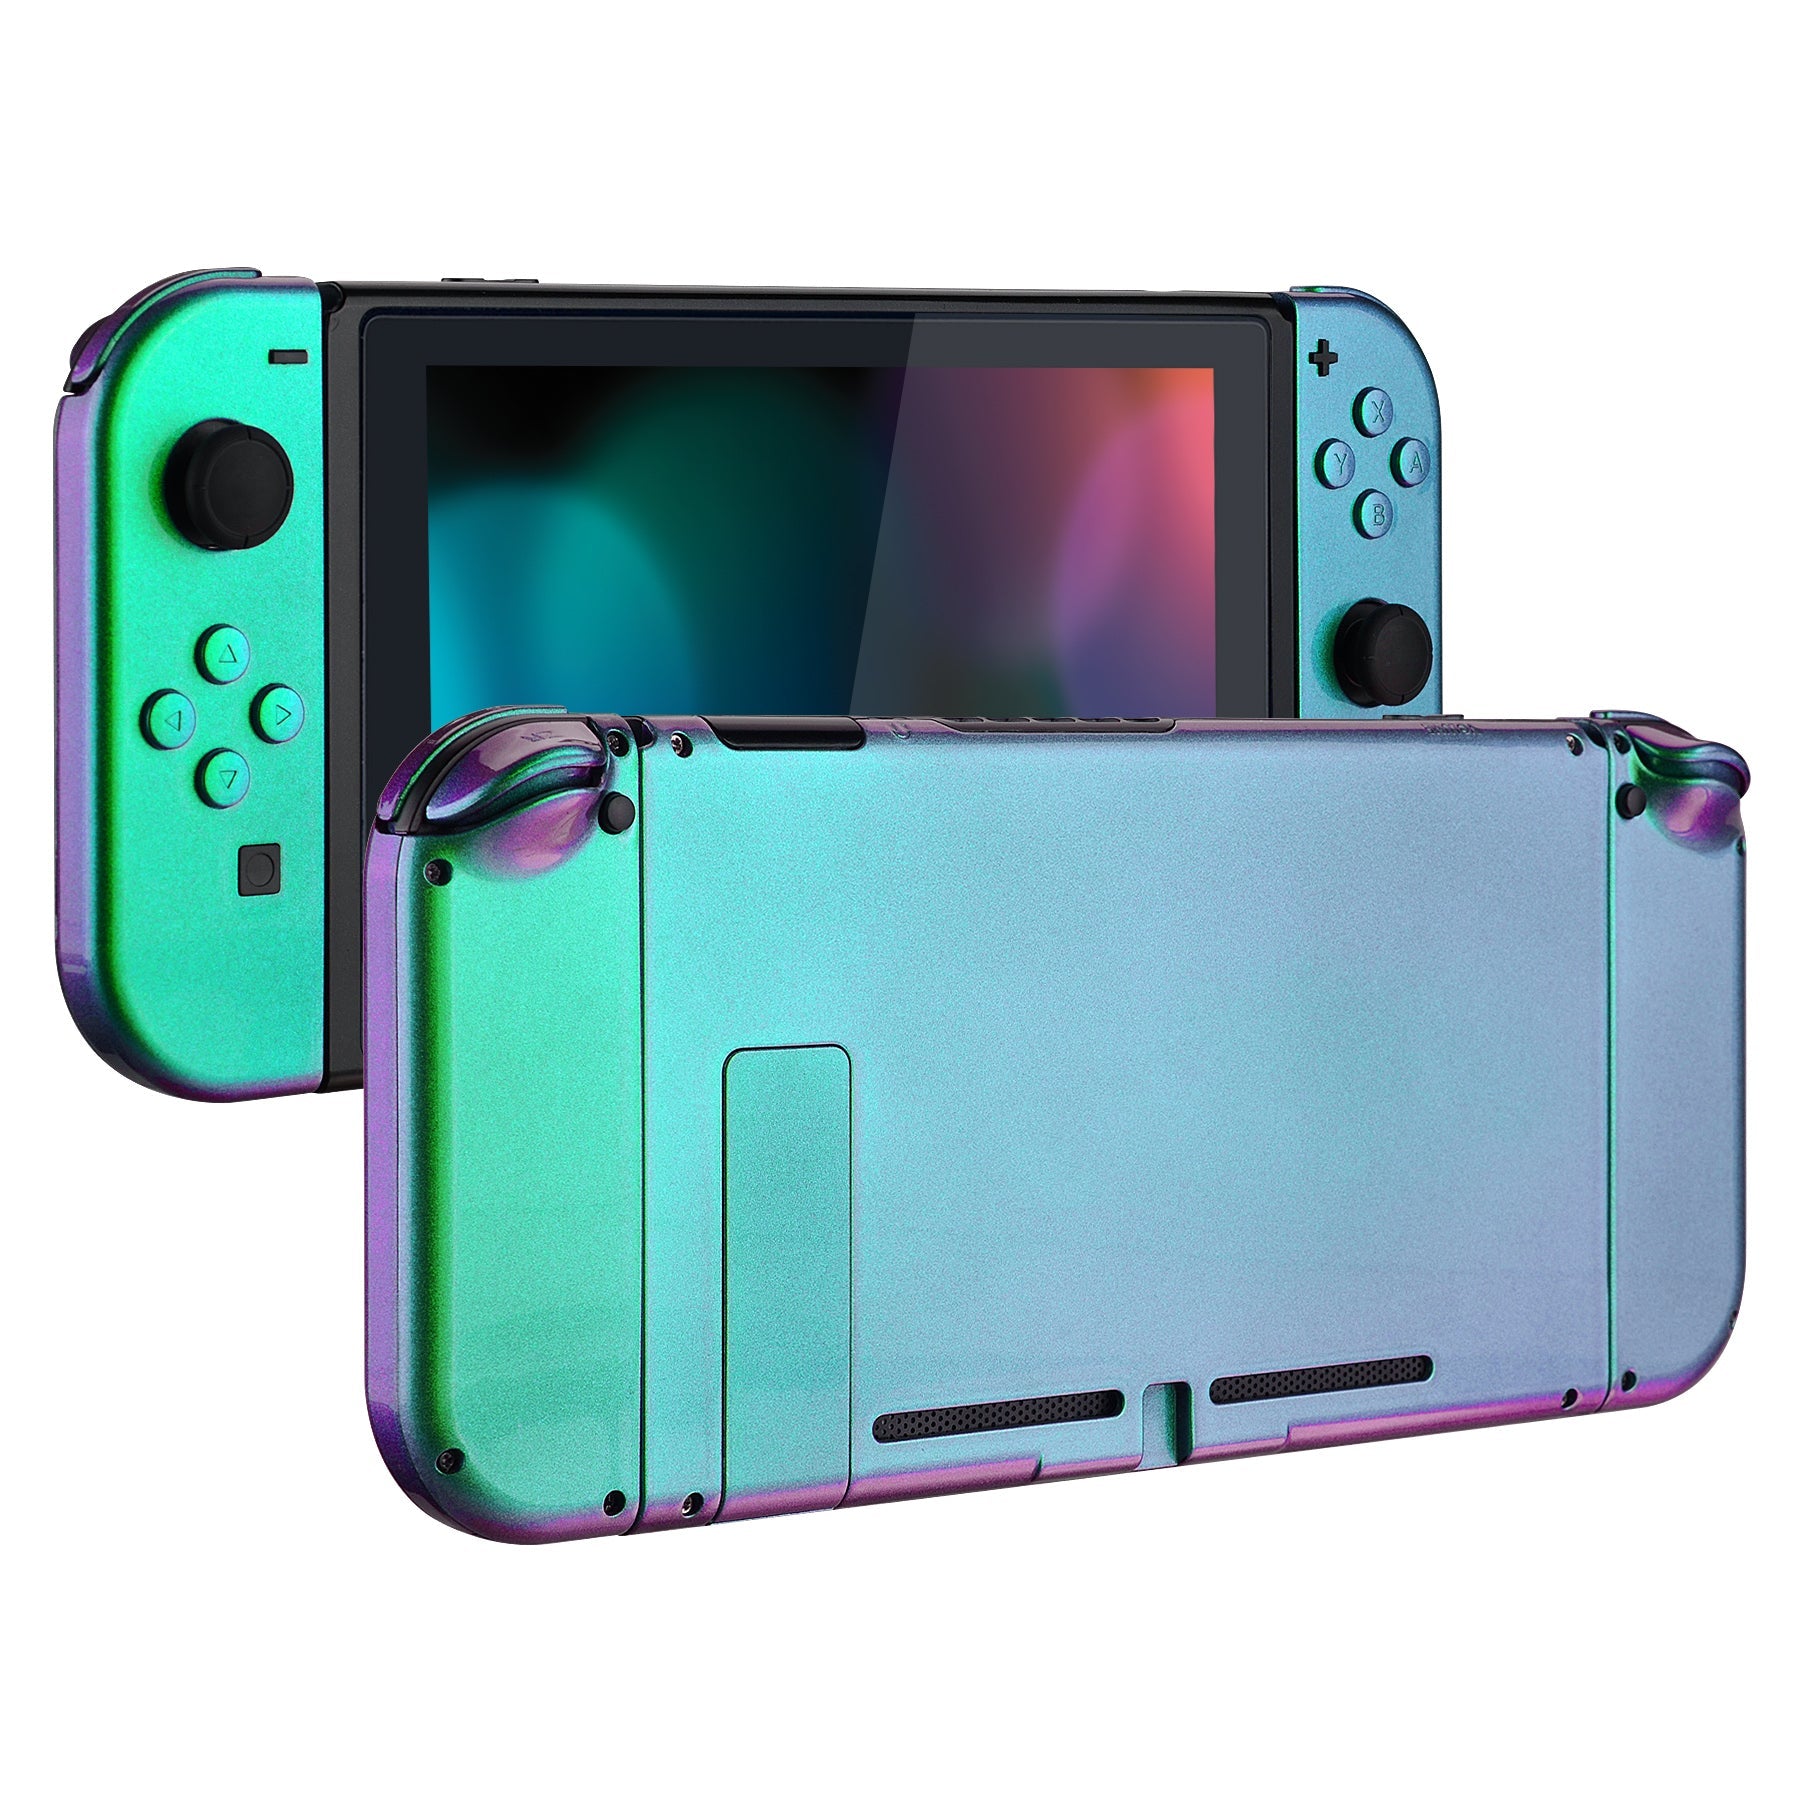 eXtremeRate Retail Glossy Back Plate for Nintendo Switch Console, NS Joycon Handheld Controller Housing with Full Set Buttons, DIY Replacement Shell for Nintendo Switch - Chameleon Green Purple - QP311